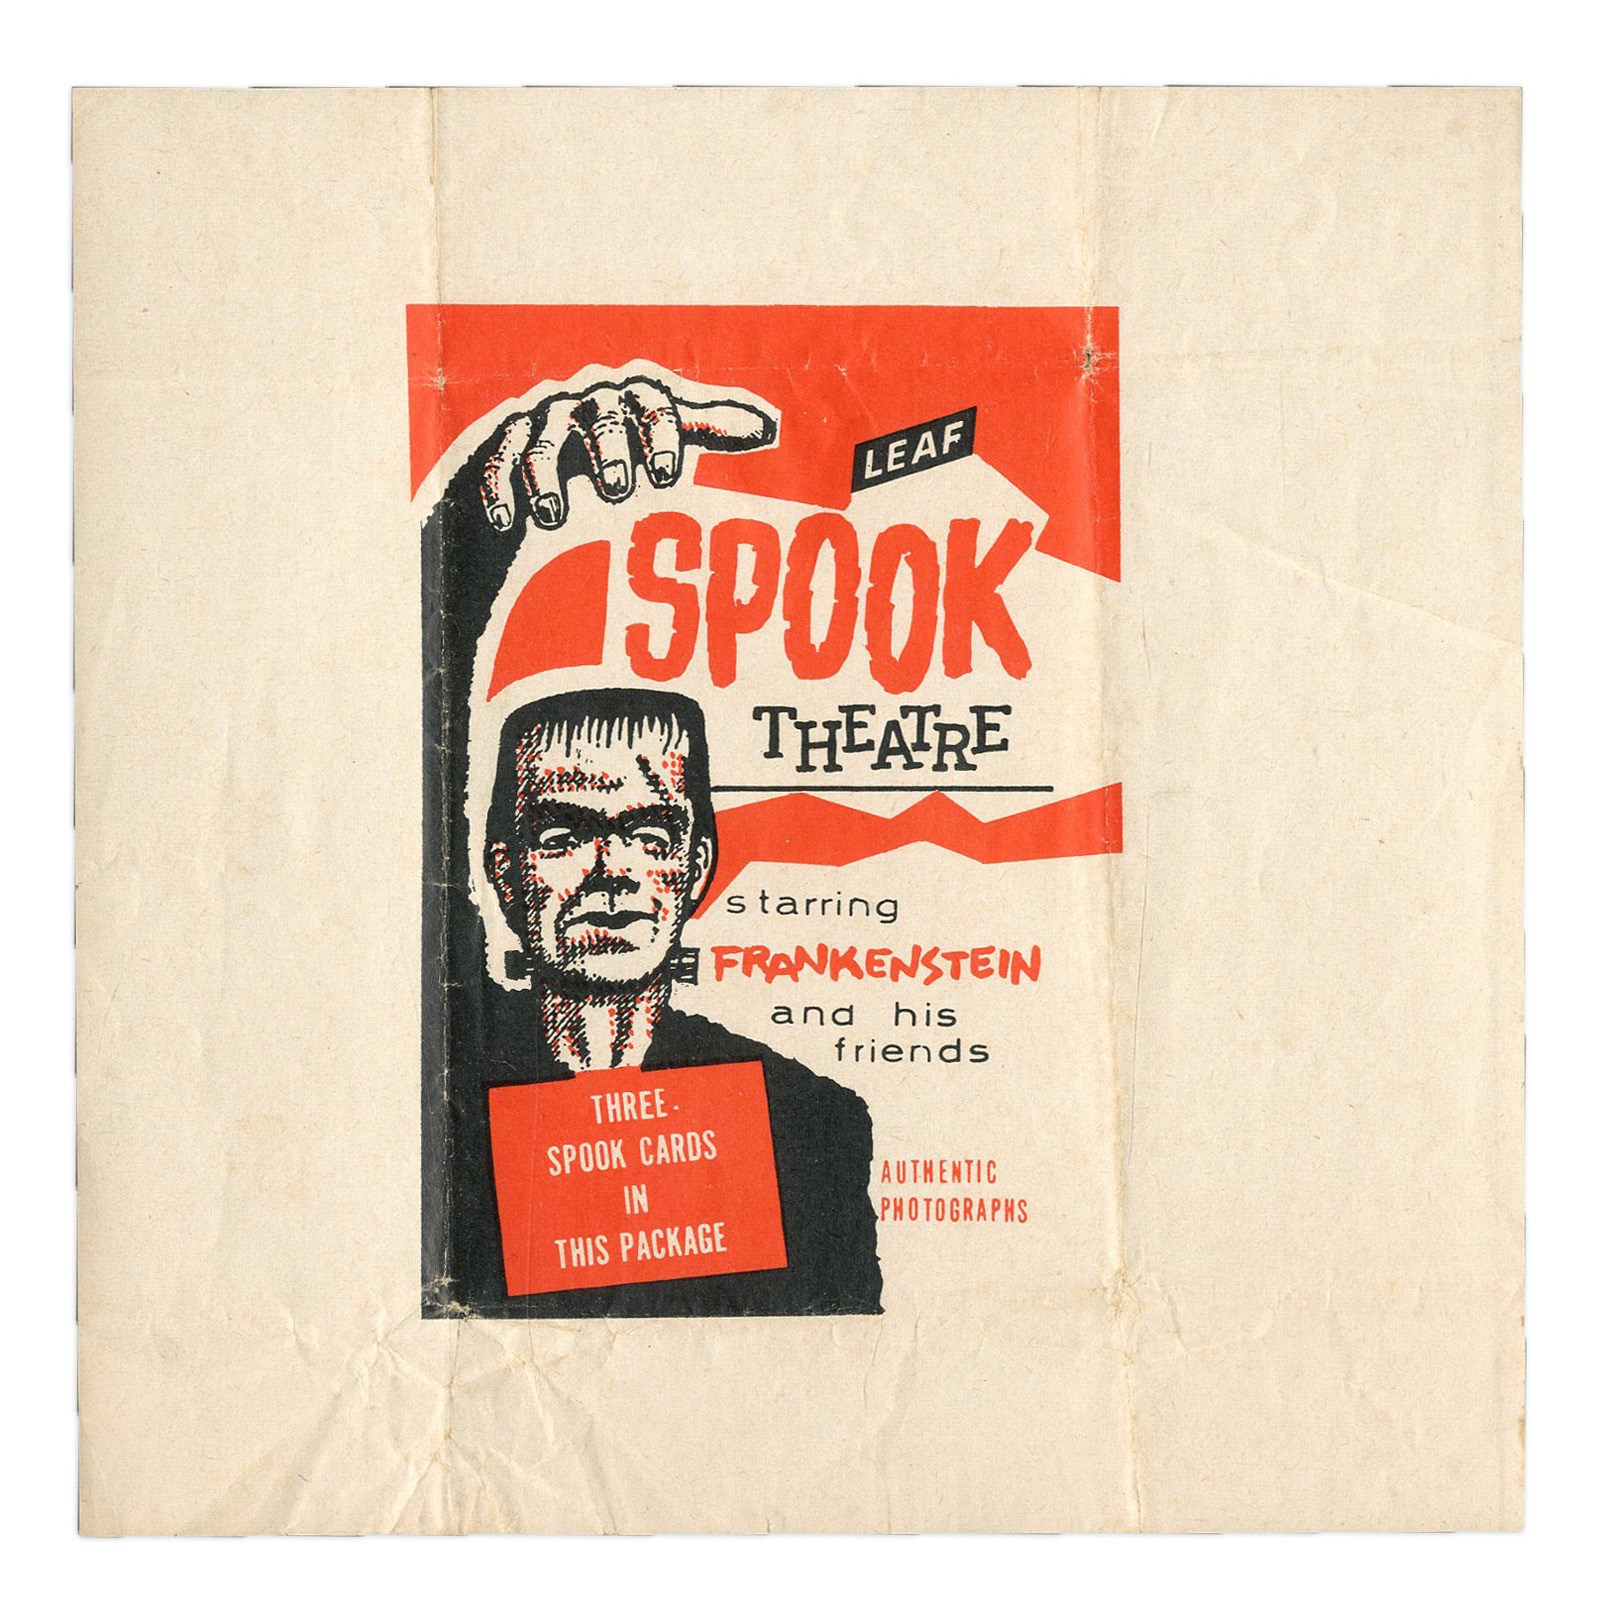 Baseball and Trading Cards - 1963 Leaf "Spook Theater" Test Proof Wrapper